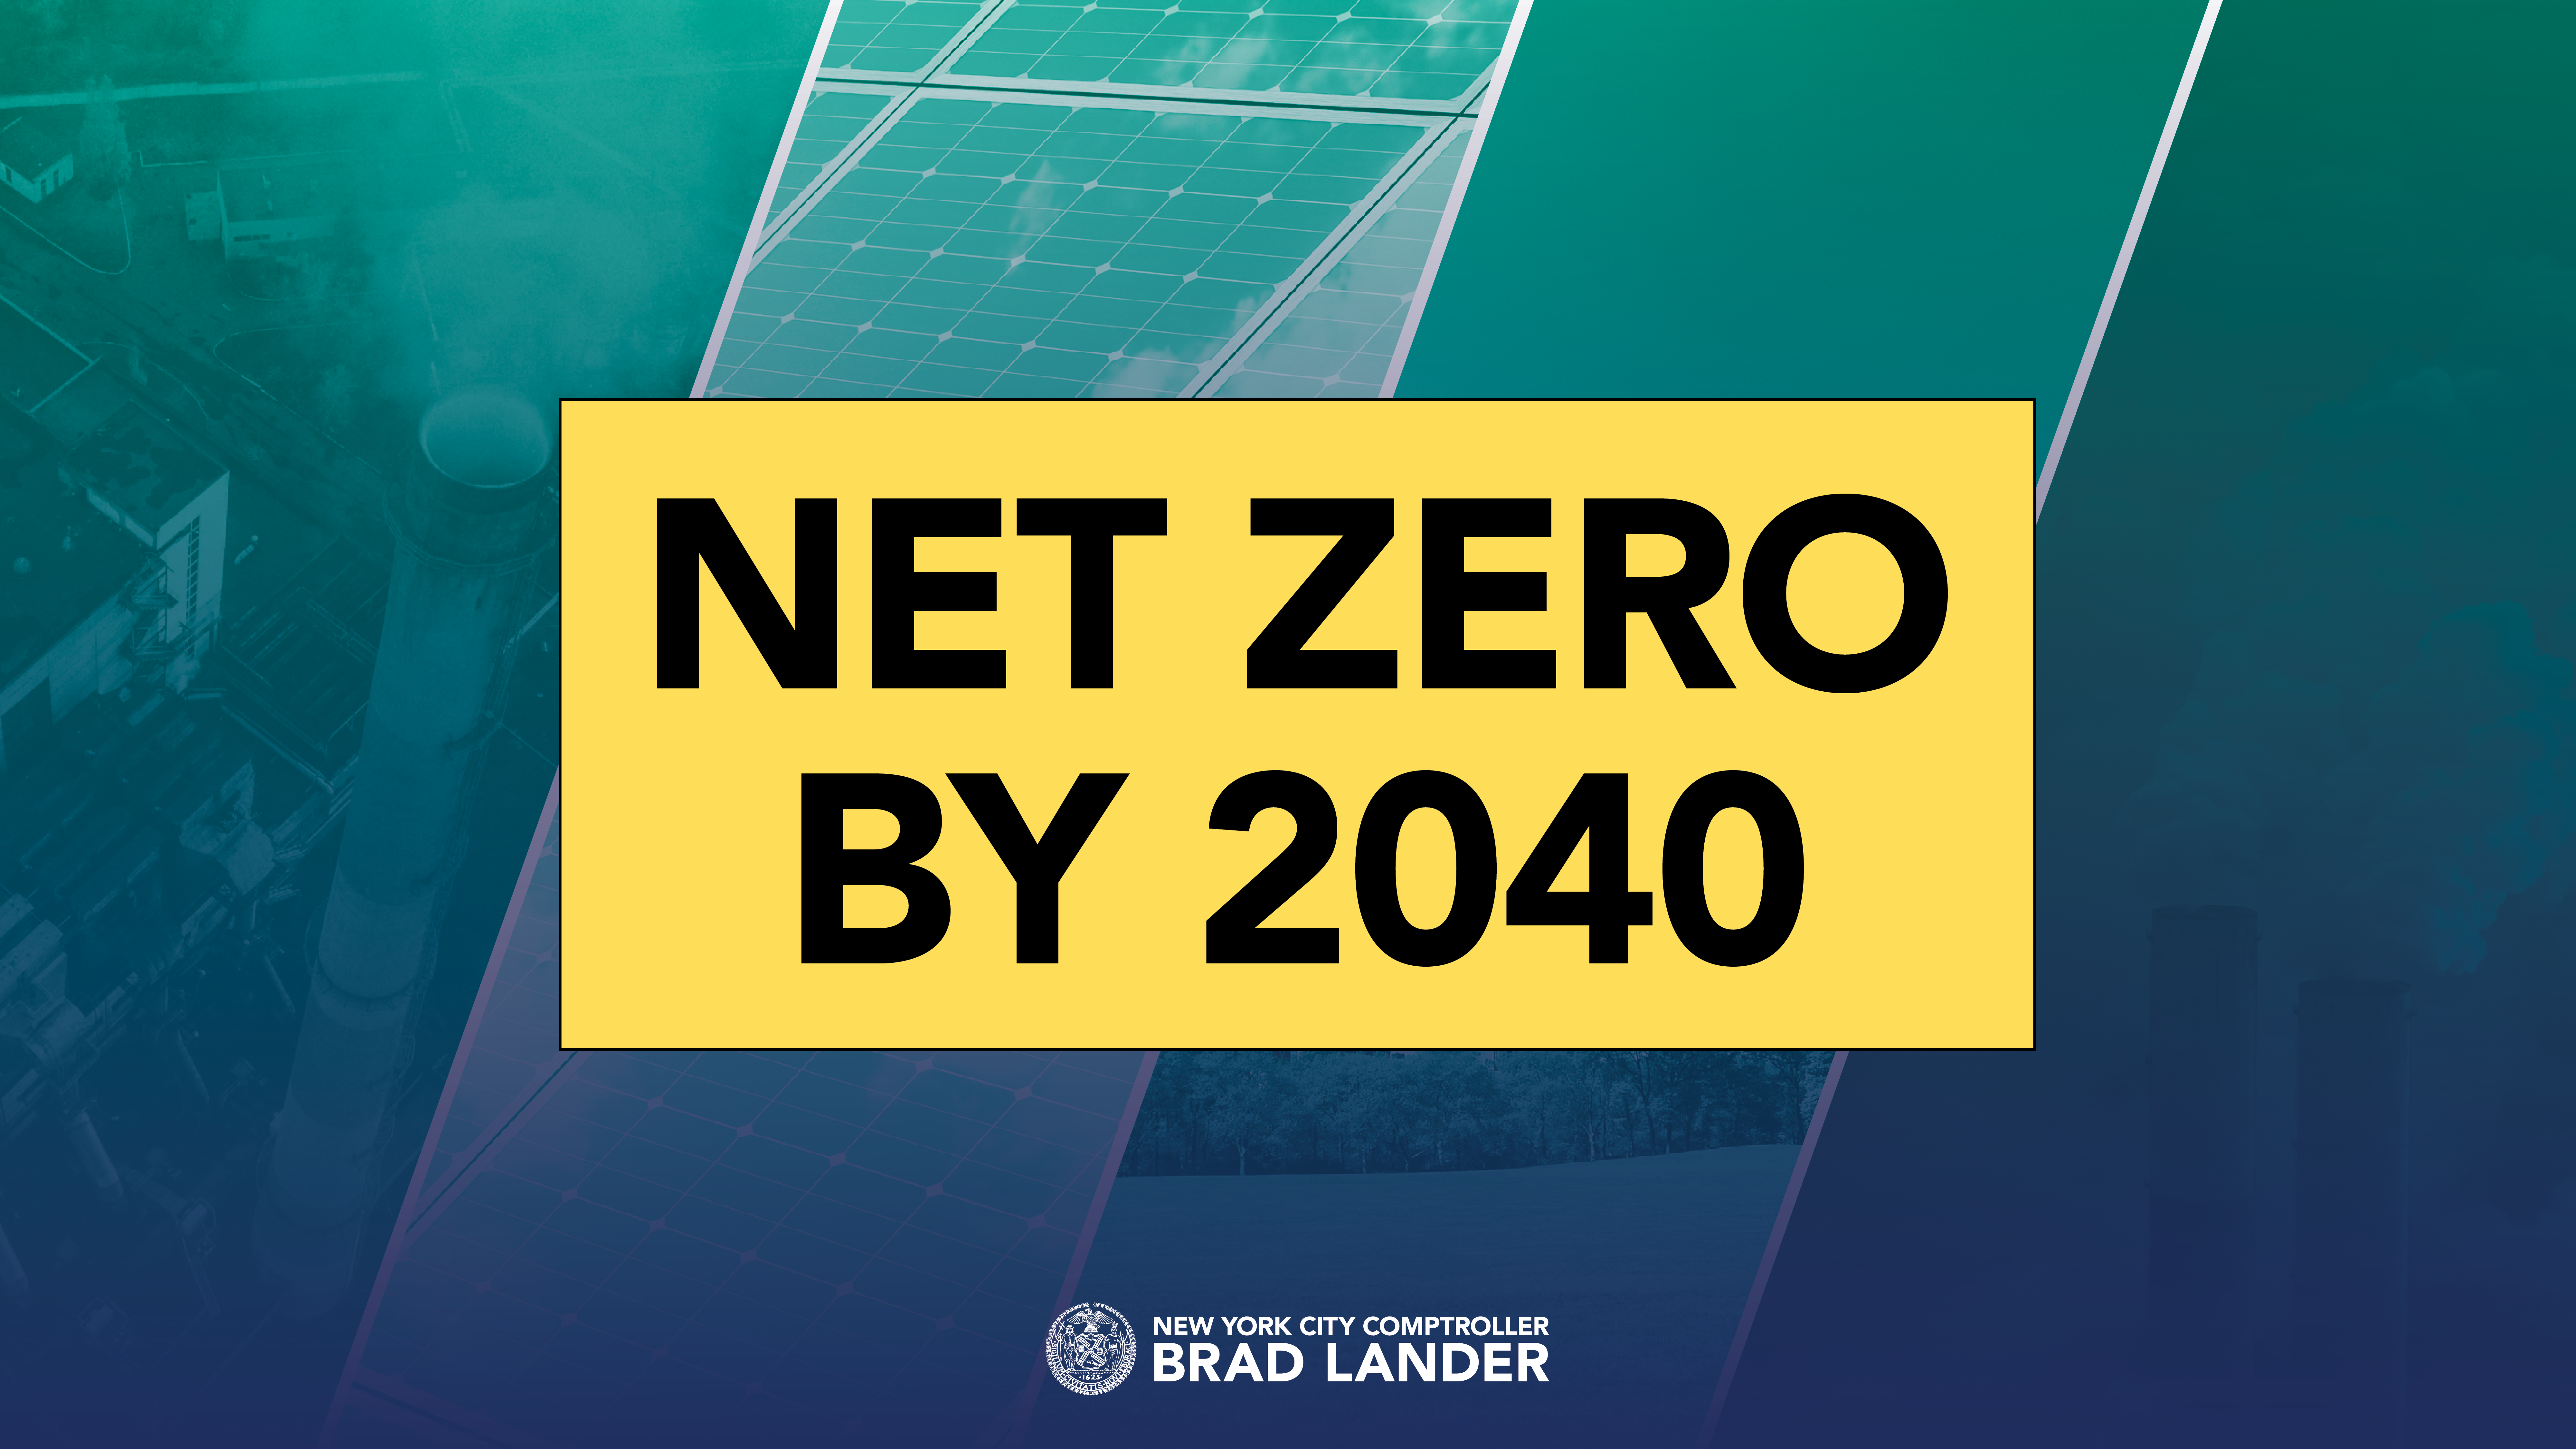 The words Net Zero by 2040 with a photo of a solar panel behind them.